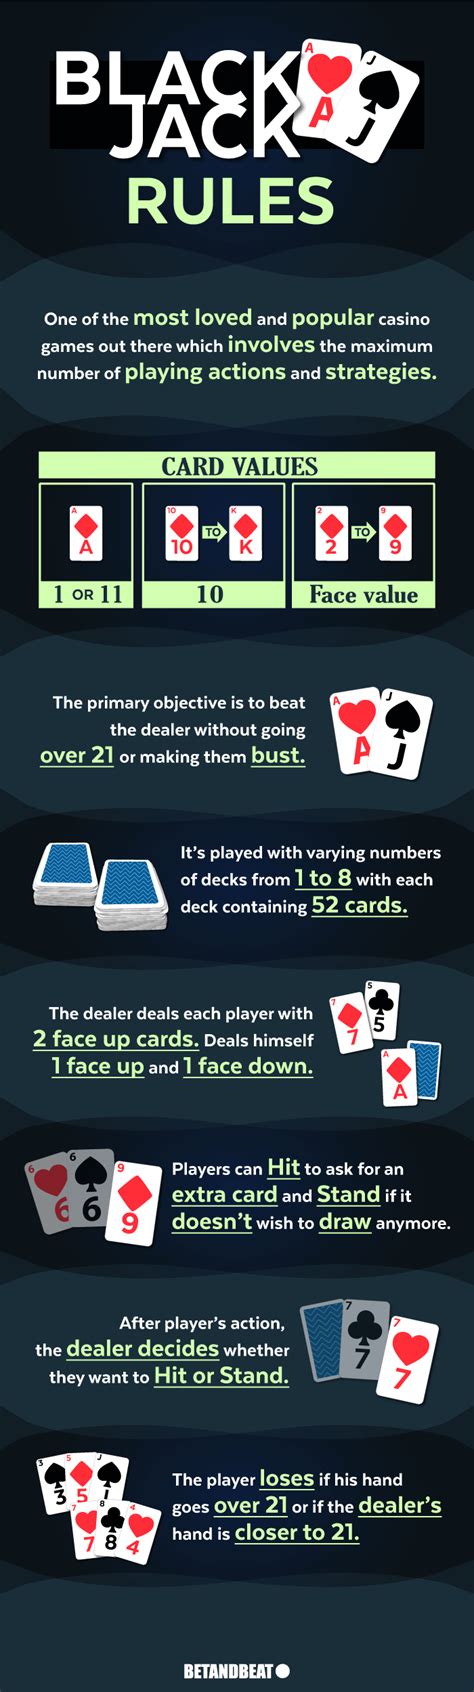 black jack 7 card rules obcy